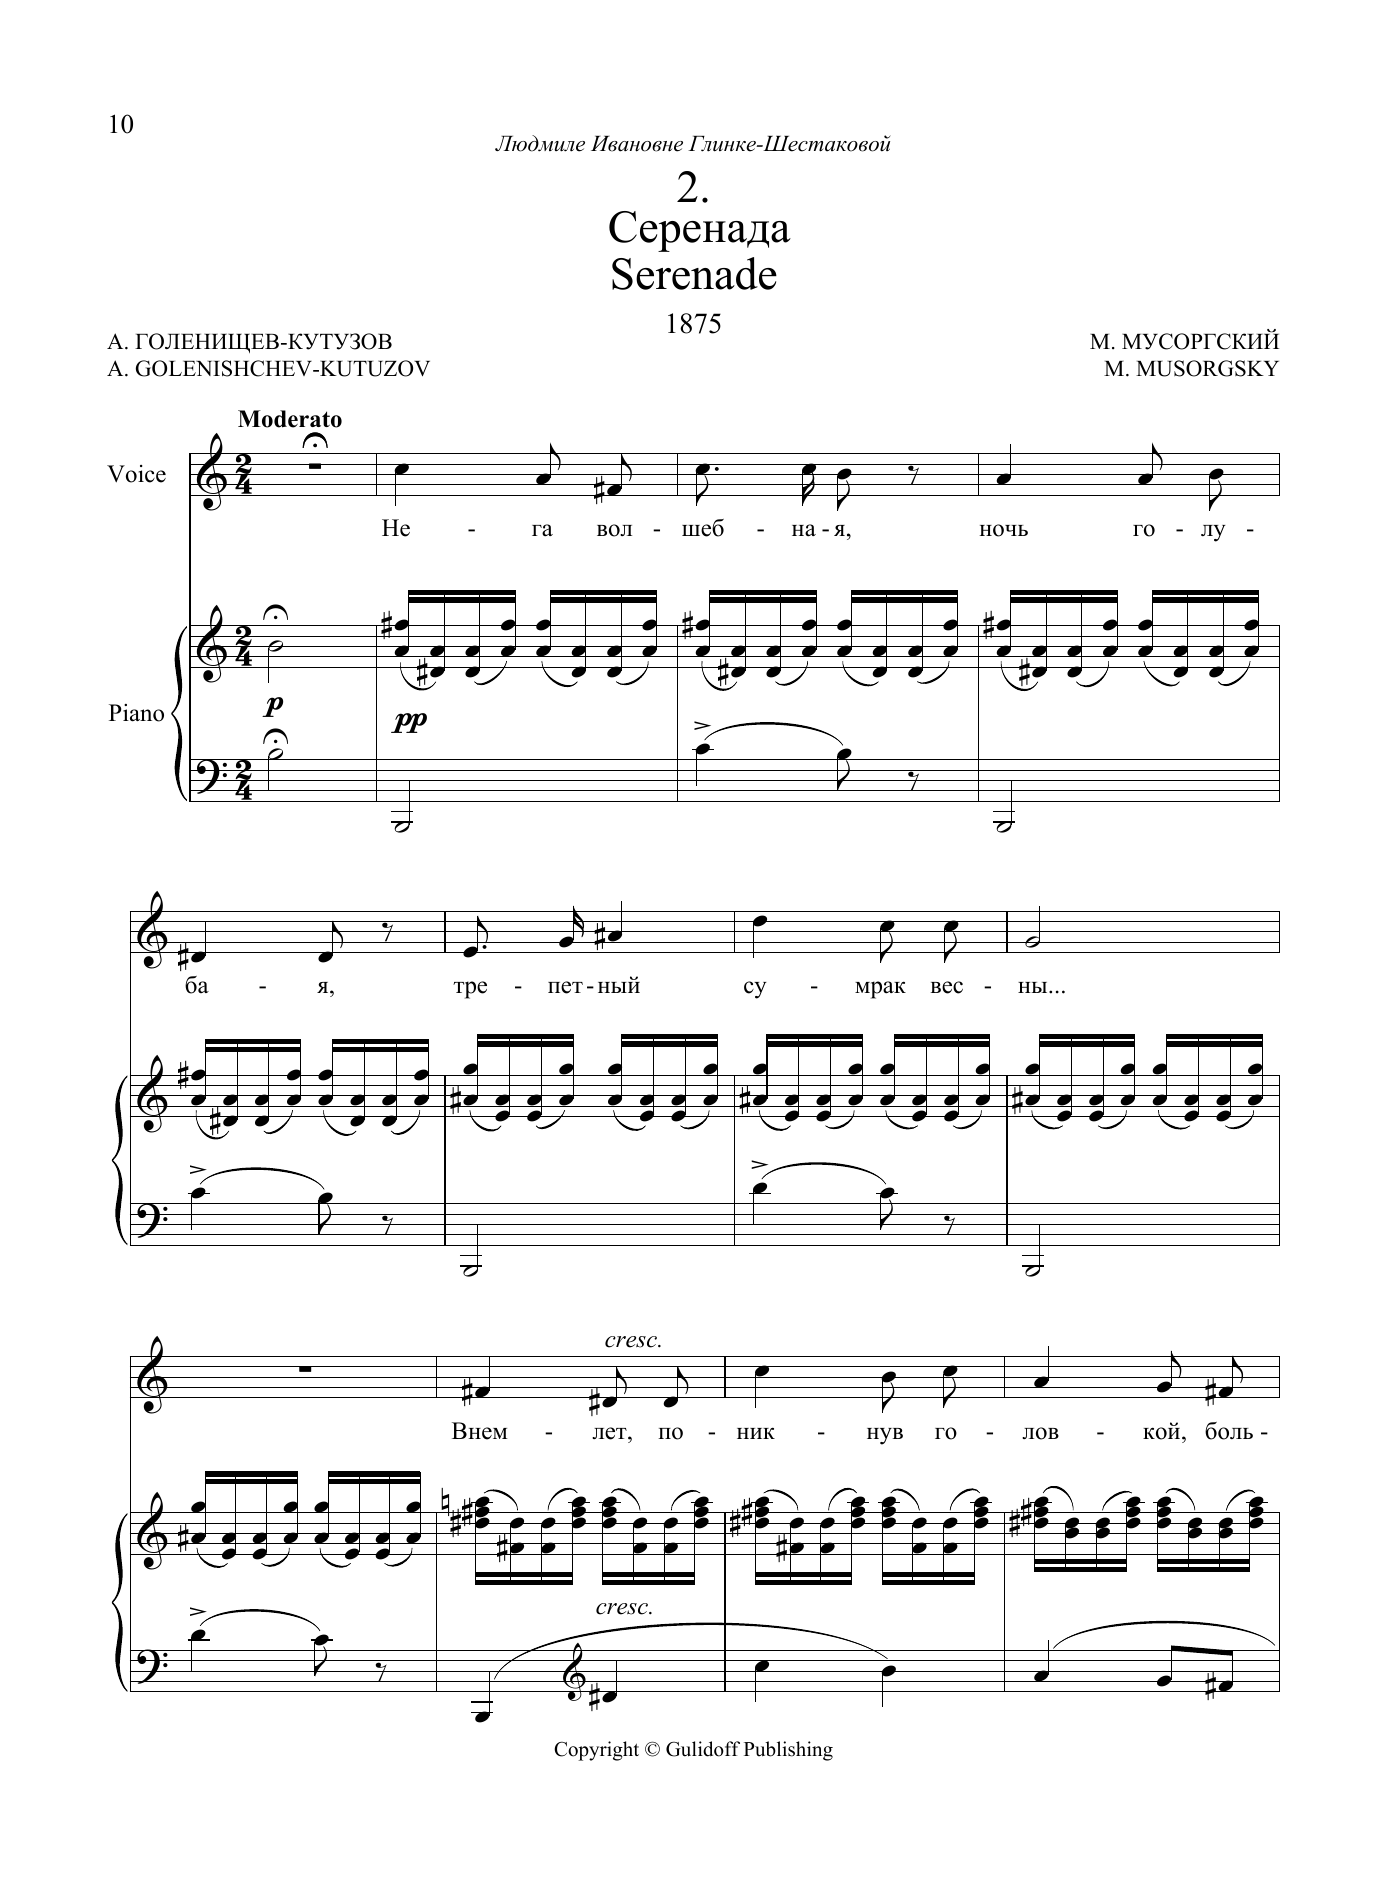 Download Modest Petrovich Mussorgsky Serenade, No. 2 from Four Songs and Dan Sheet Music